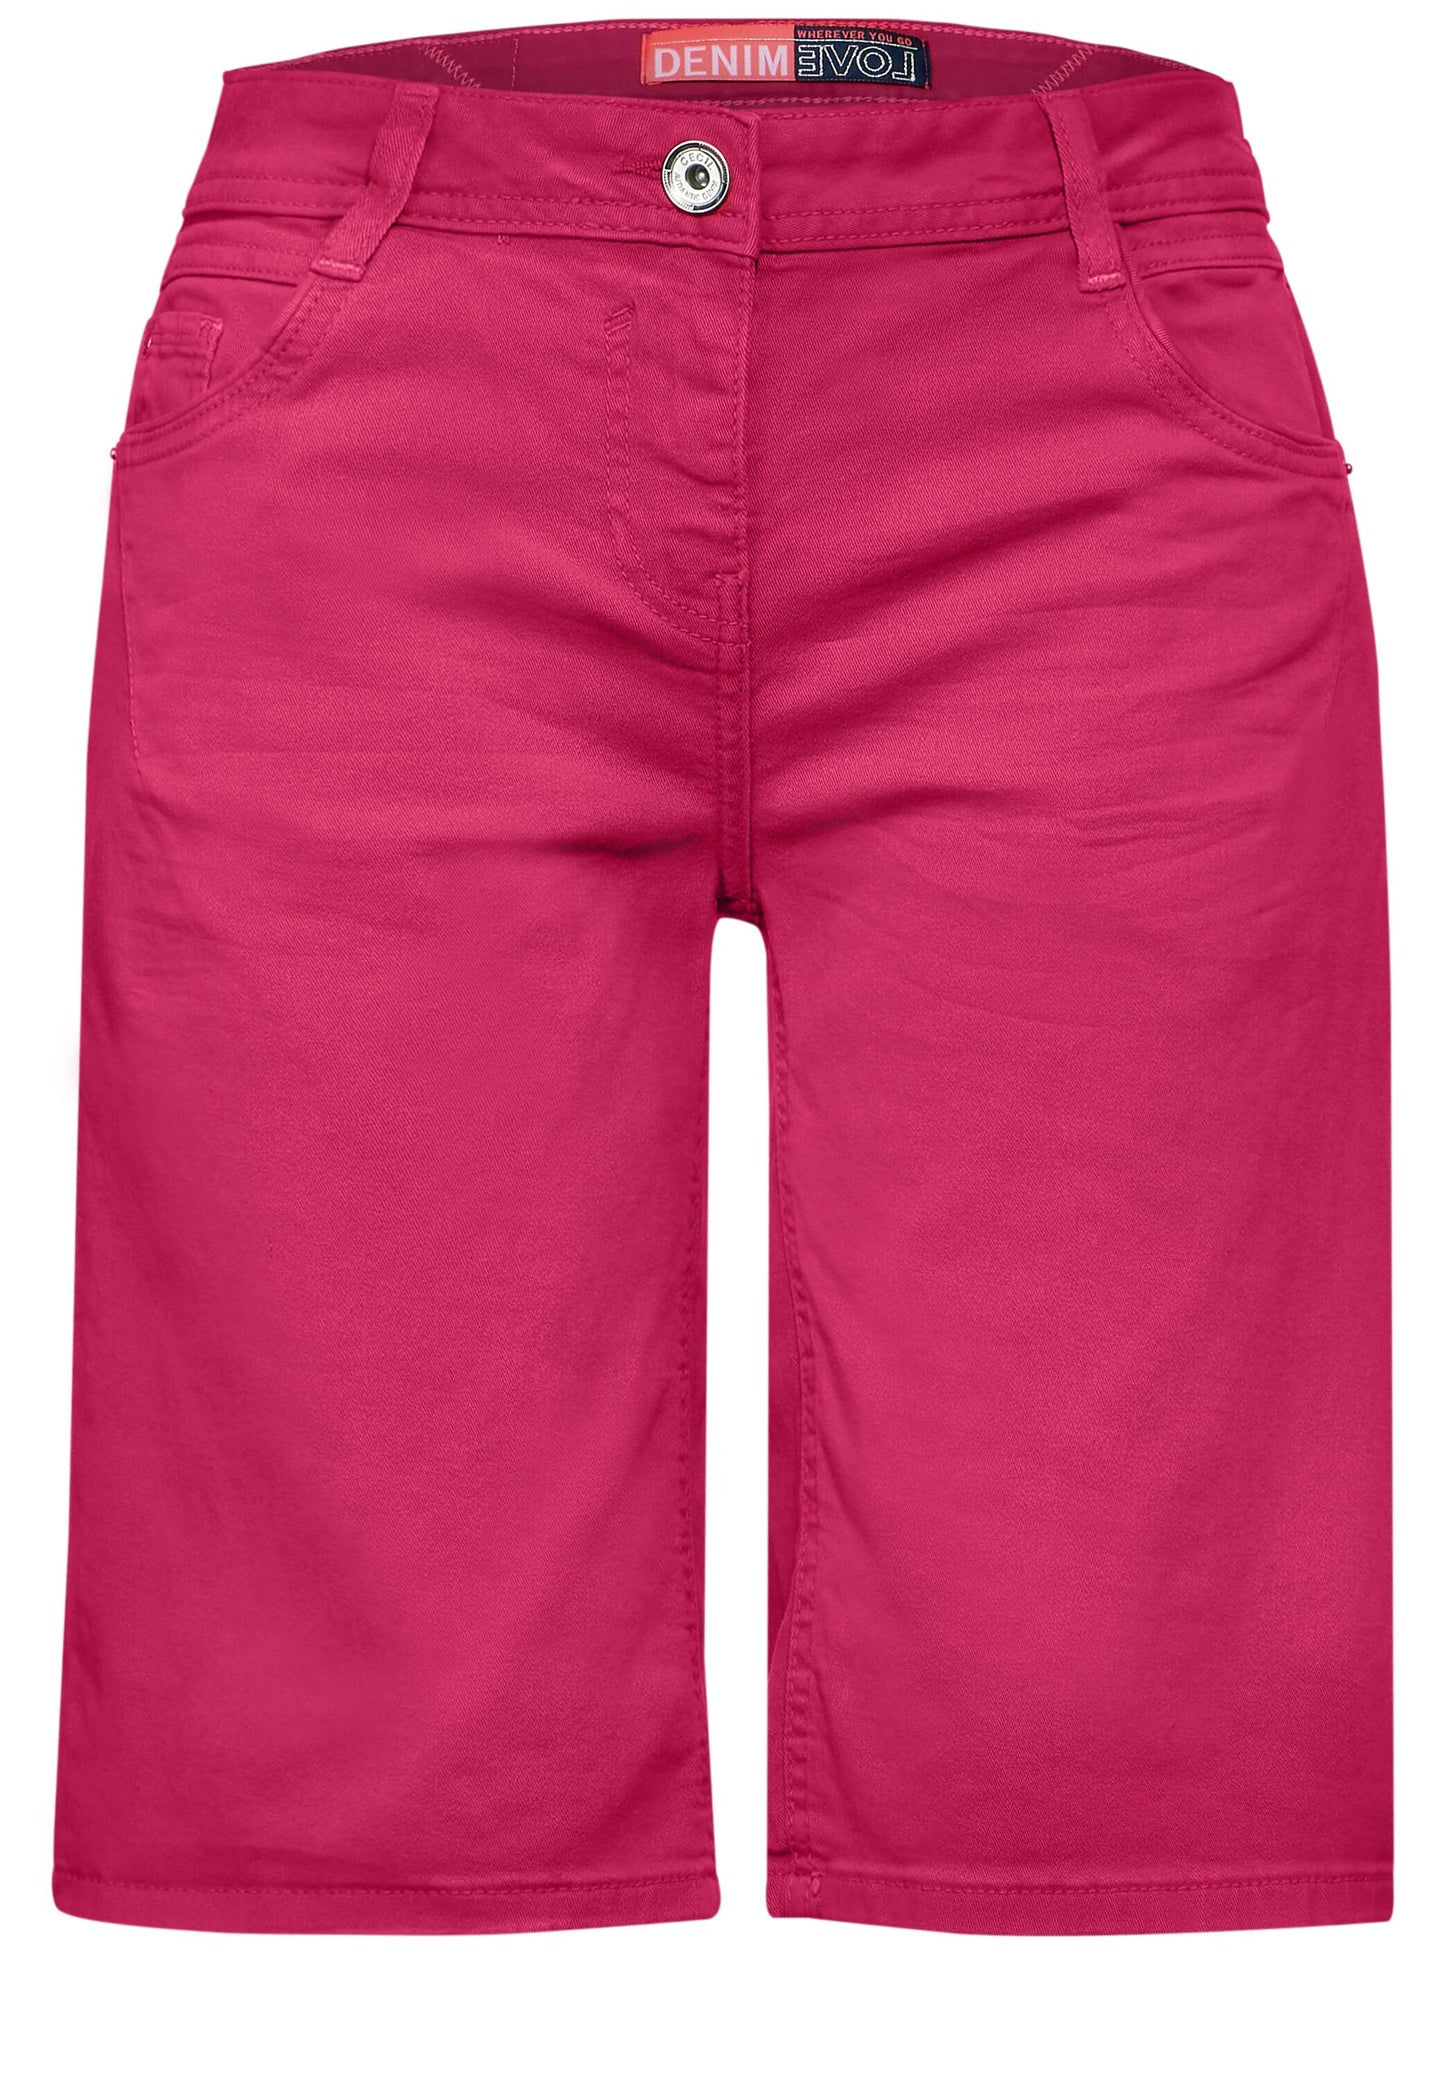 CECIL - Jeans Shorts - pink sorbet - Style Scarlett